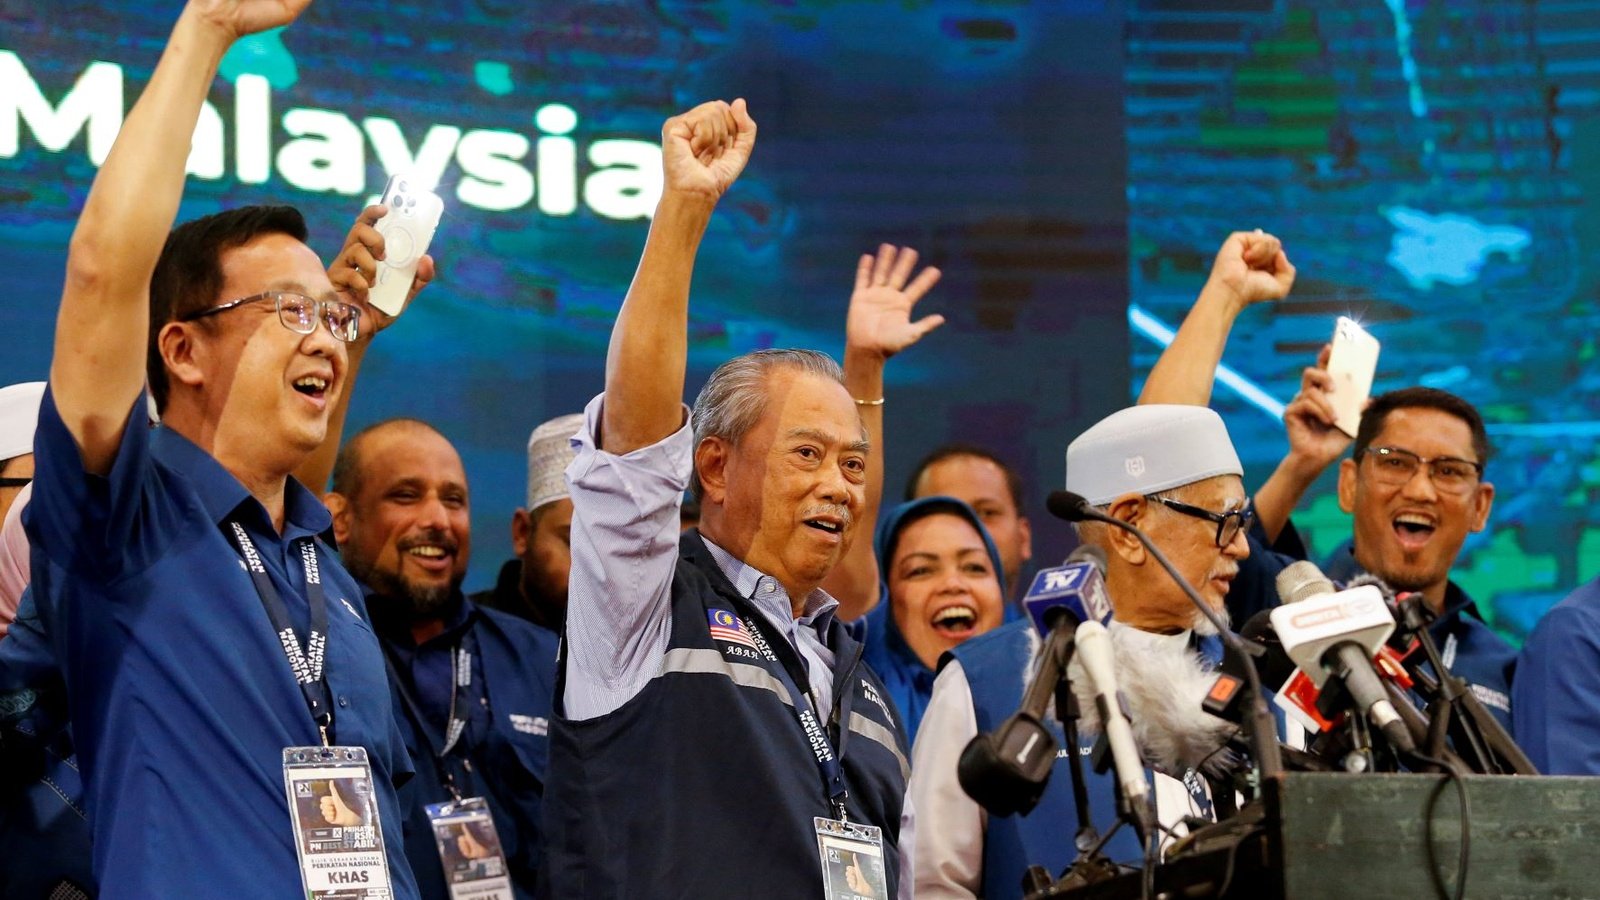 Malaysia’s Election More Turmoil Ahead? Council on Foreign Relations